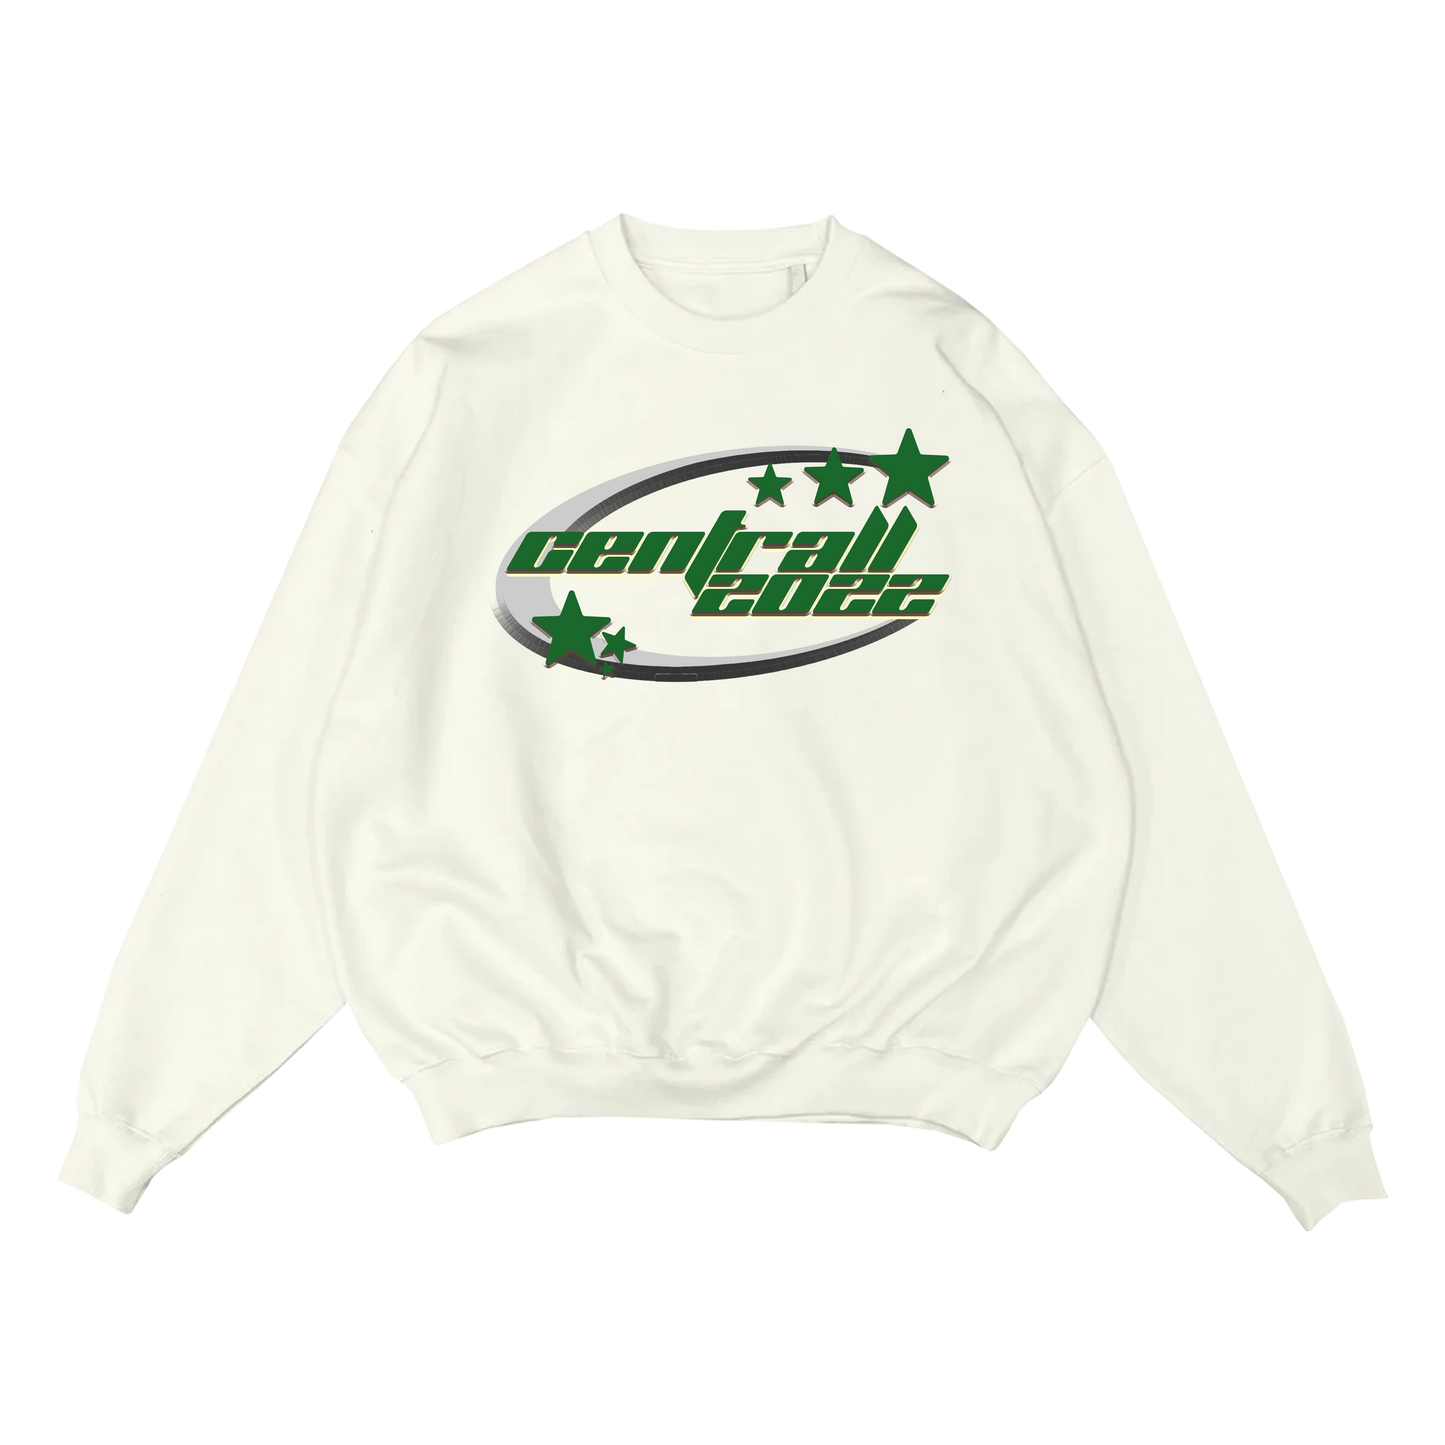 Centrall Moon Star “City of Lights" Crewneck White